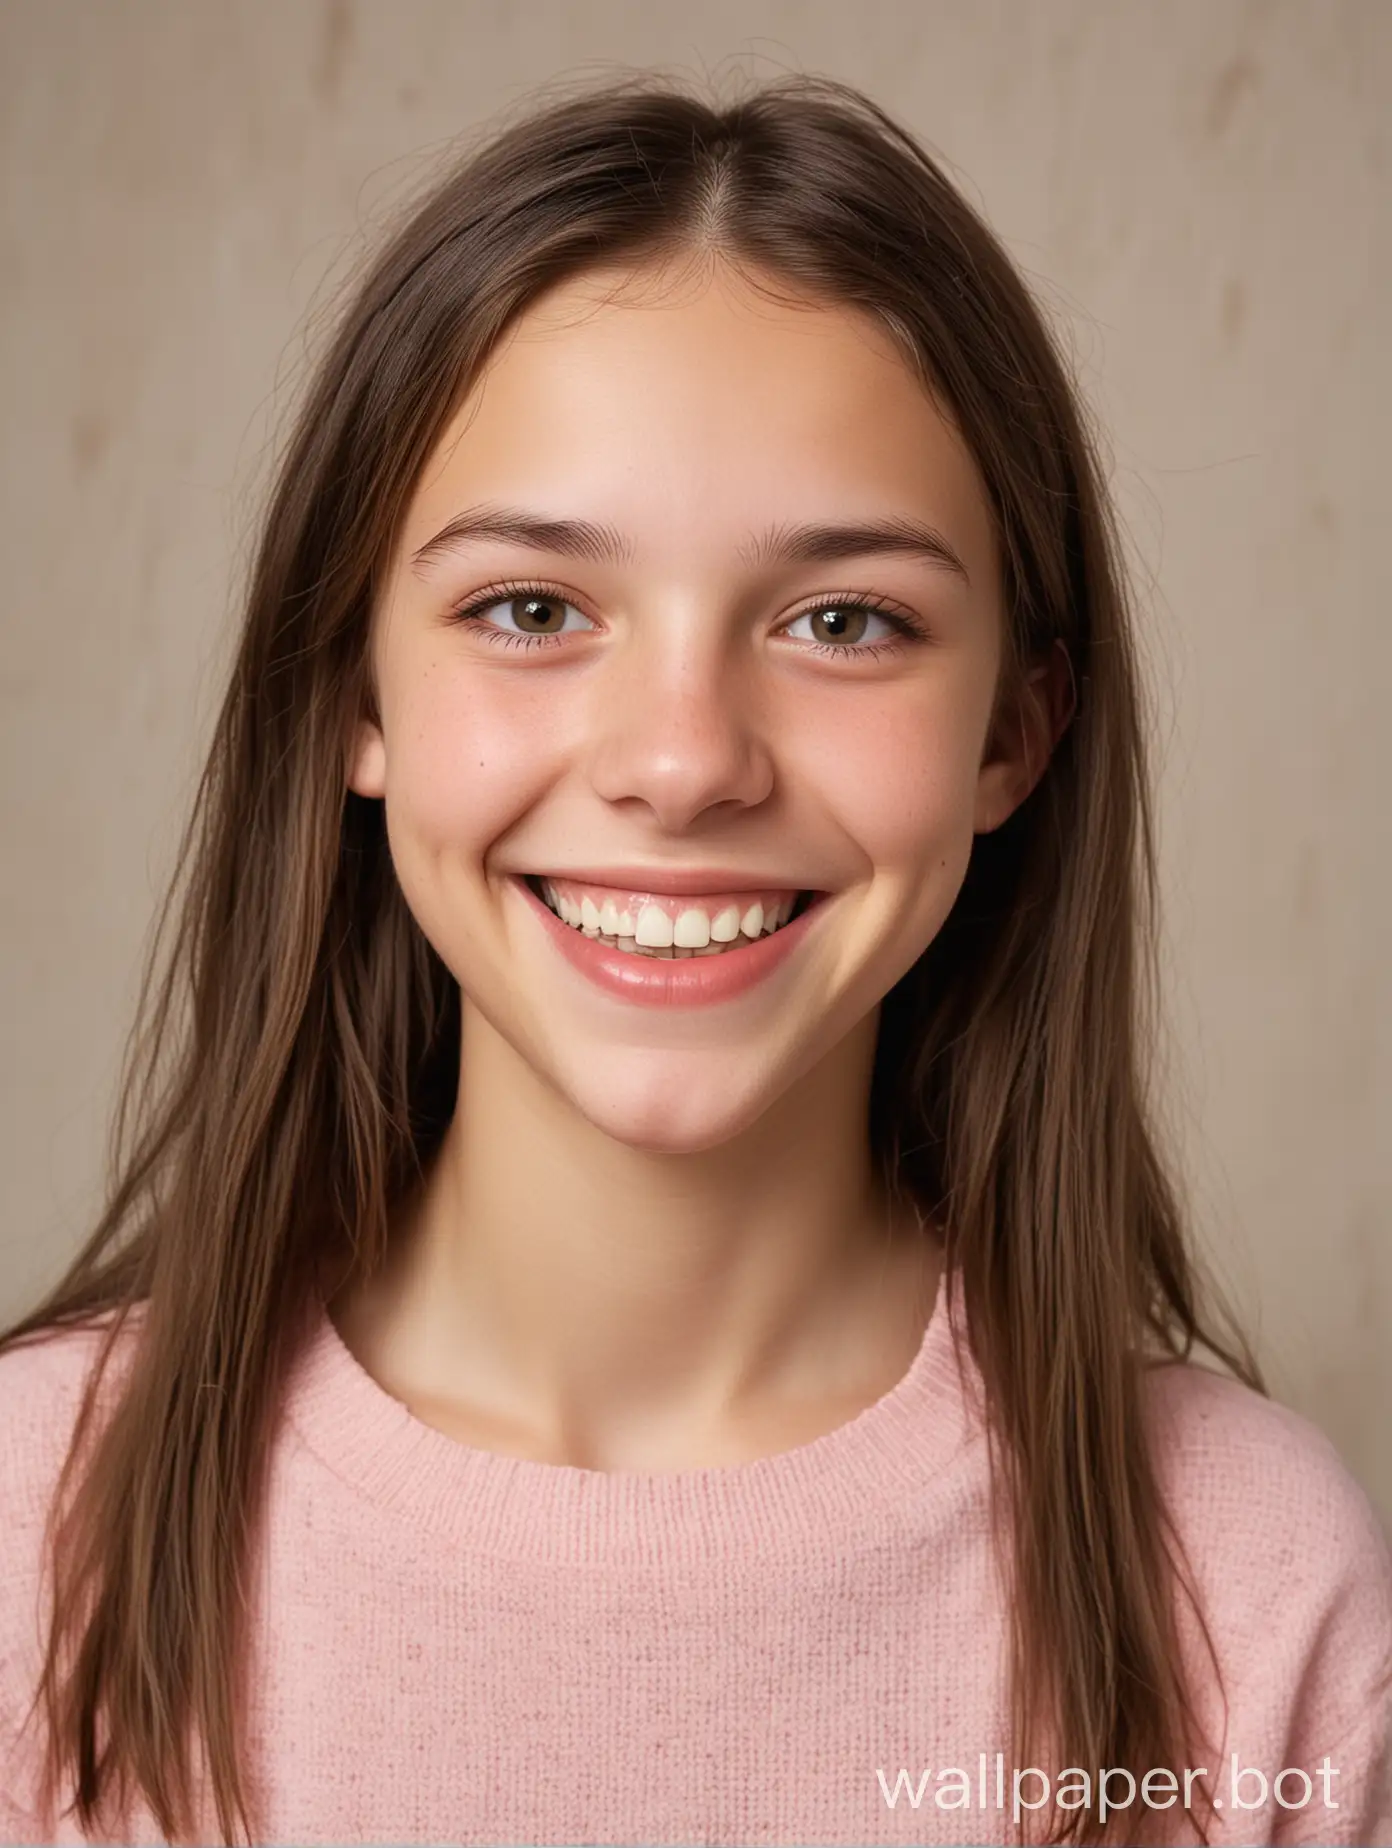 Blushing-14YearOld-Brunette-with-Braces